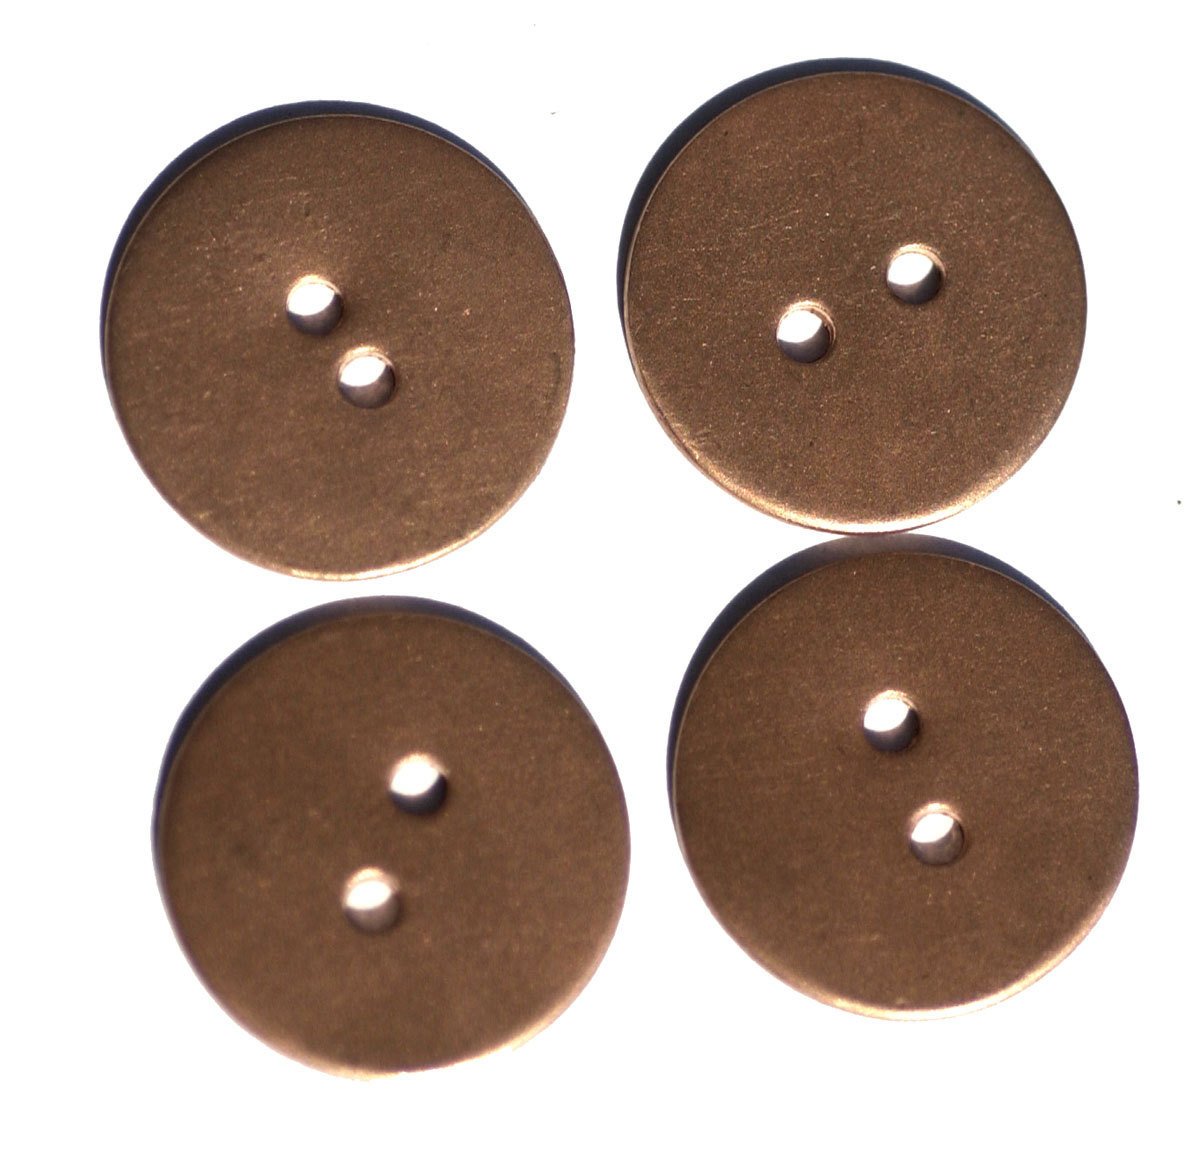 Buttons Copper with two Holes 20mm 20g Blanks Cutout for Enameling Stamping Texturing Blanks Variety Metals